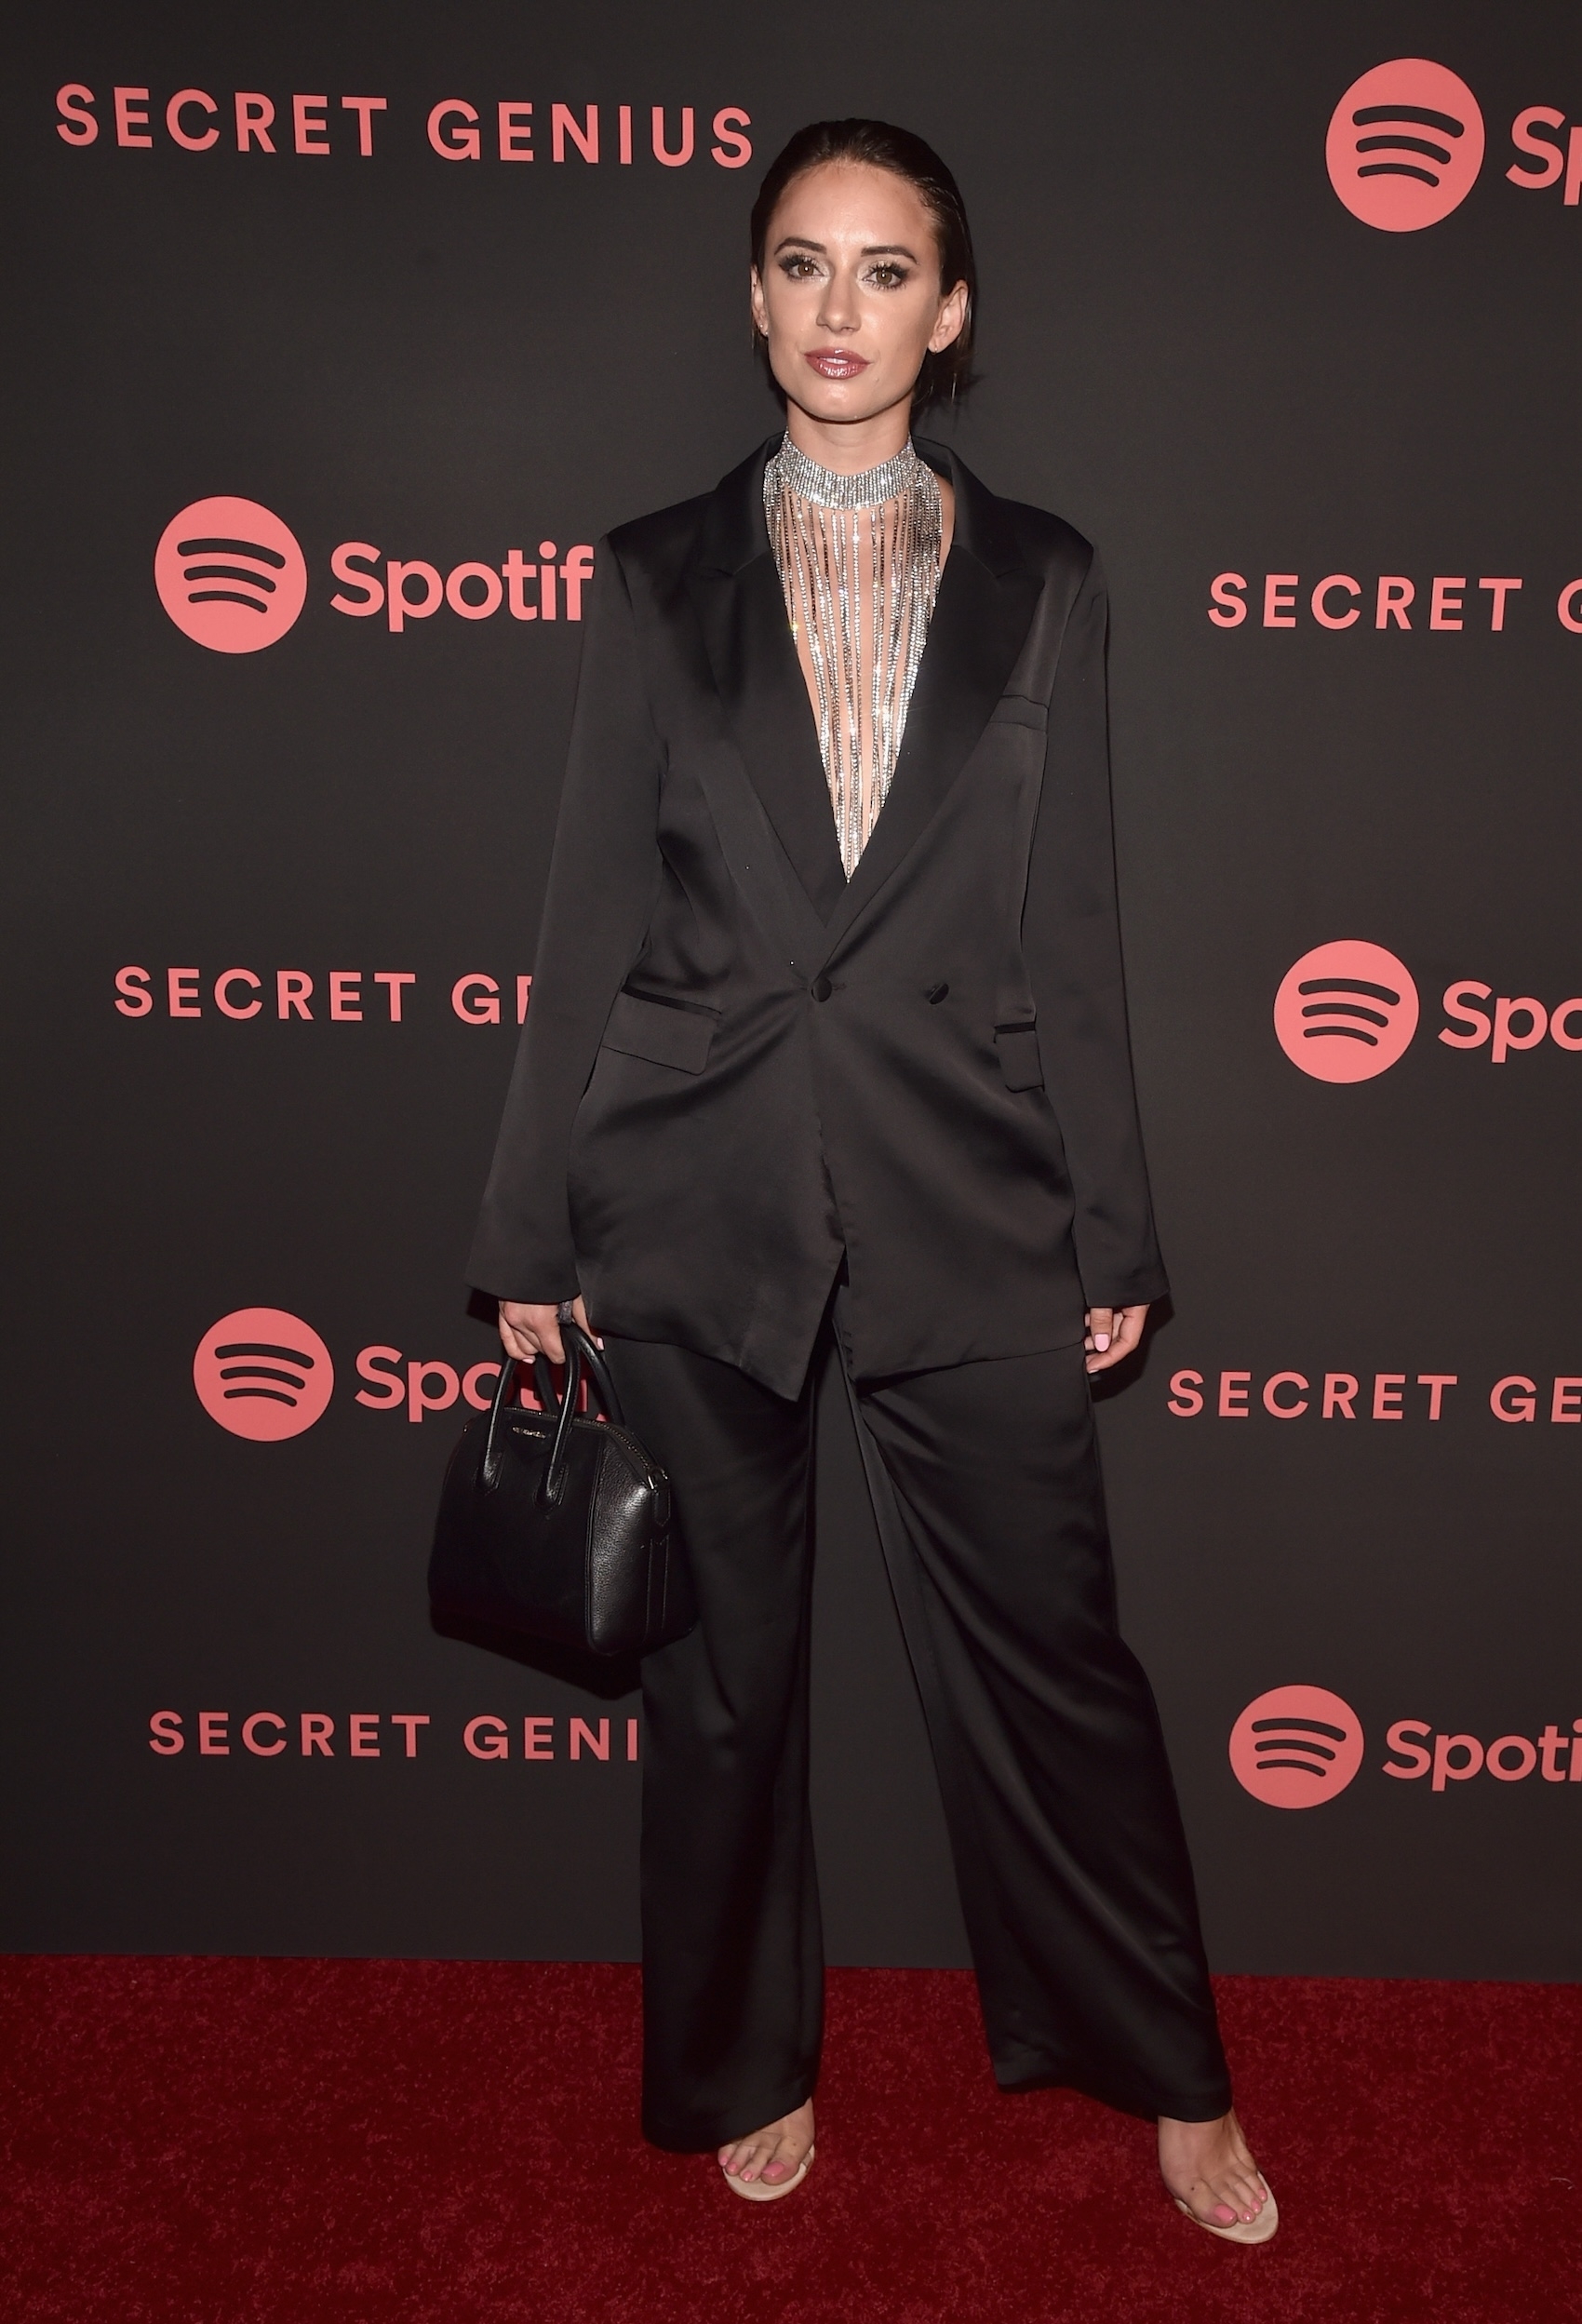 Olivia Culpo in a black suit with a beaded neckpiece at Spotify event